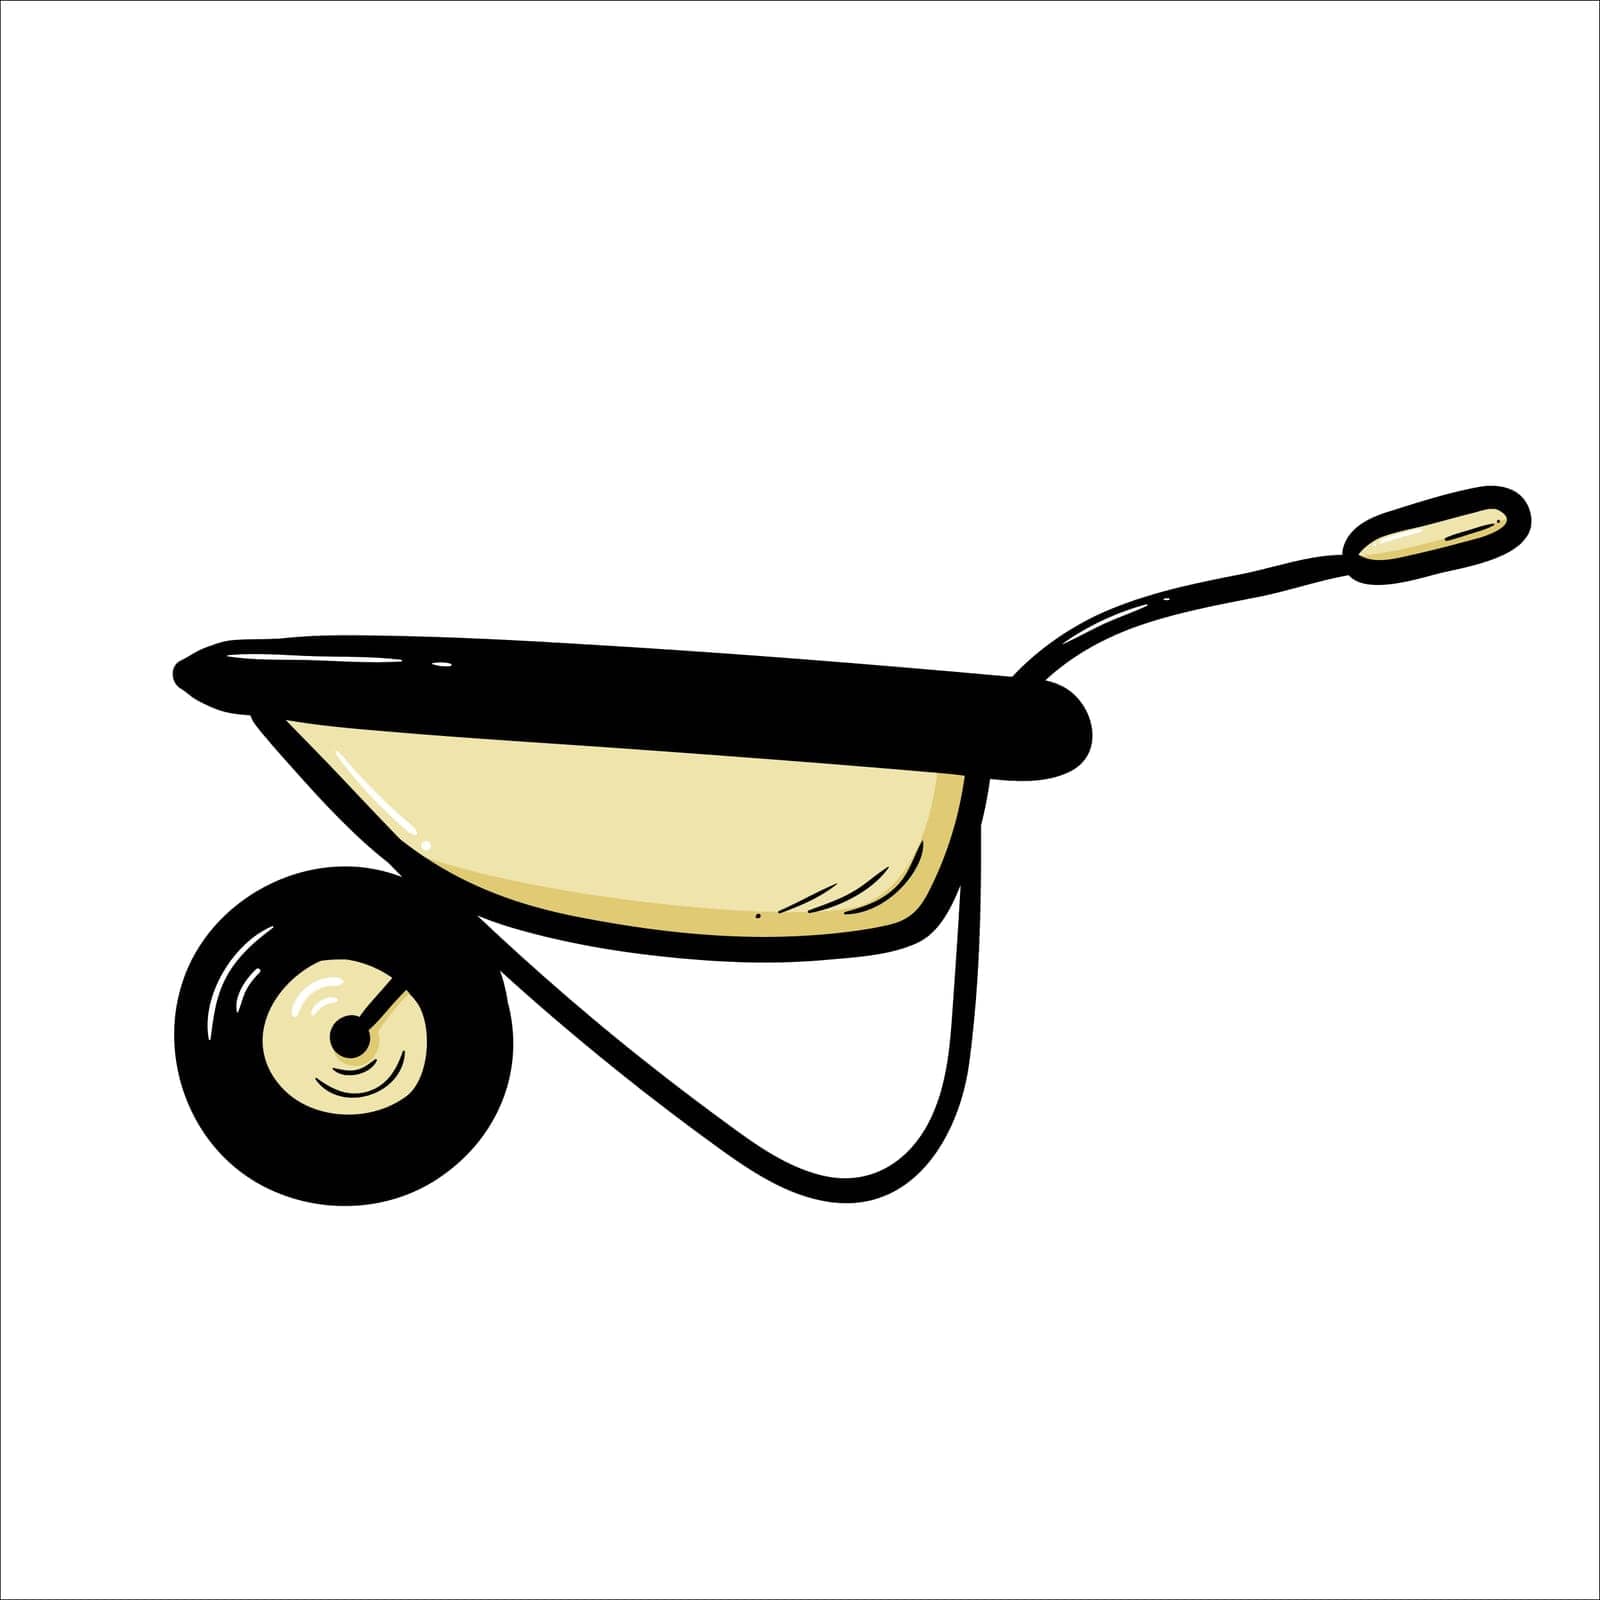 Hand drawn garden wheelbarrow. Doodle sketch style vector illustration. Drawing line simple wheelbarrow icon isolated on white by Anny_Sketches